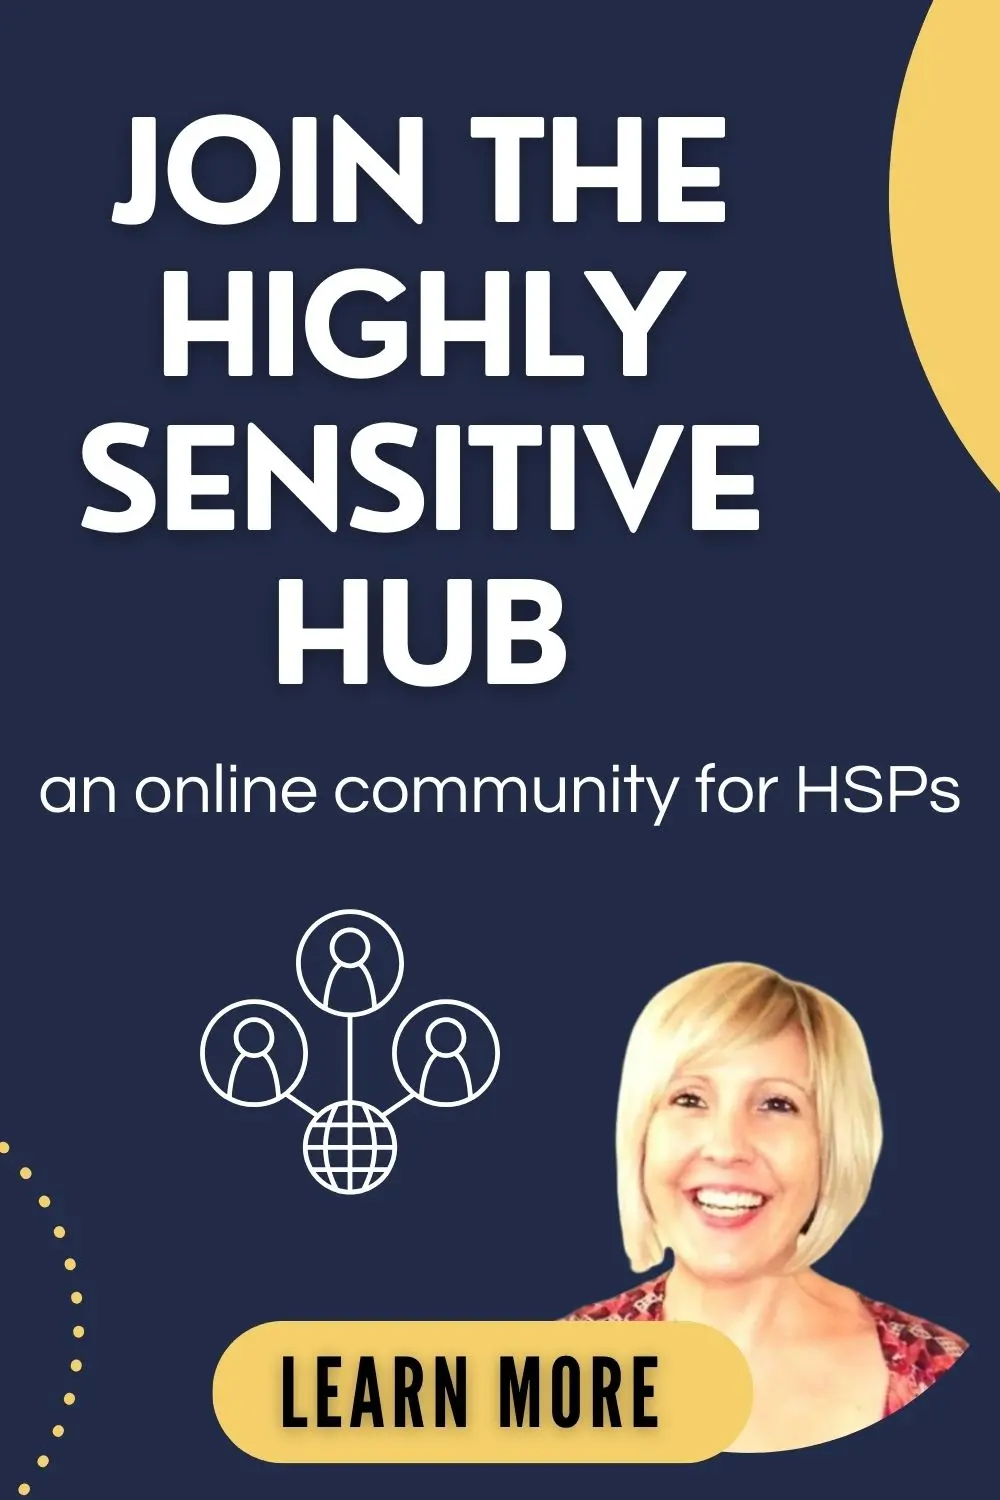 Join The Highly Sensitive Hub - a Community for HSPs